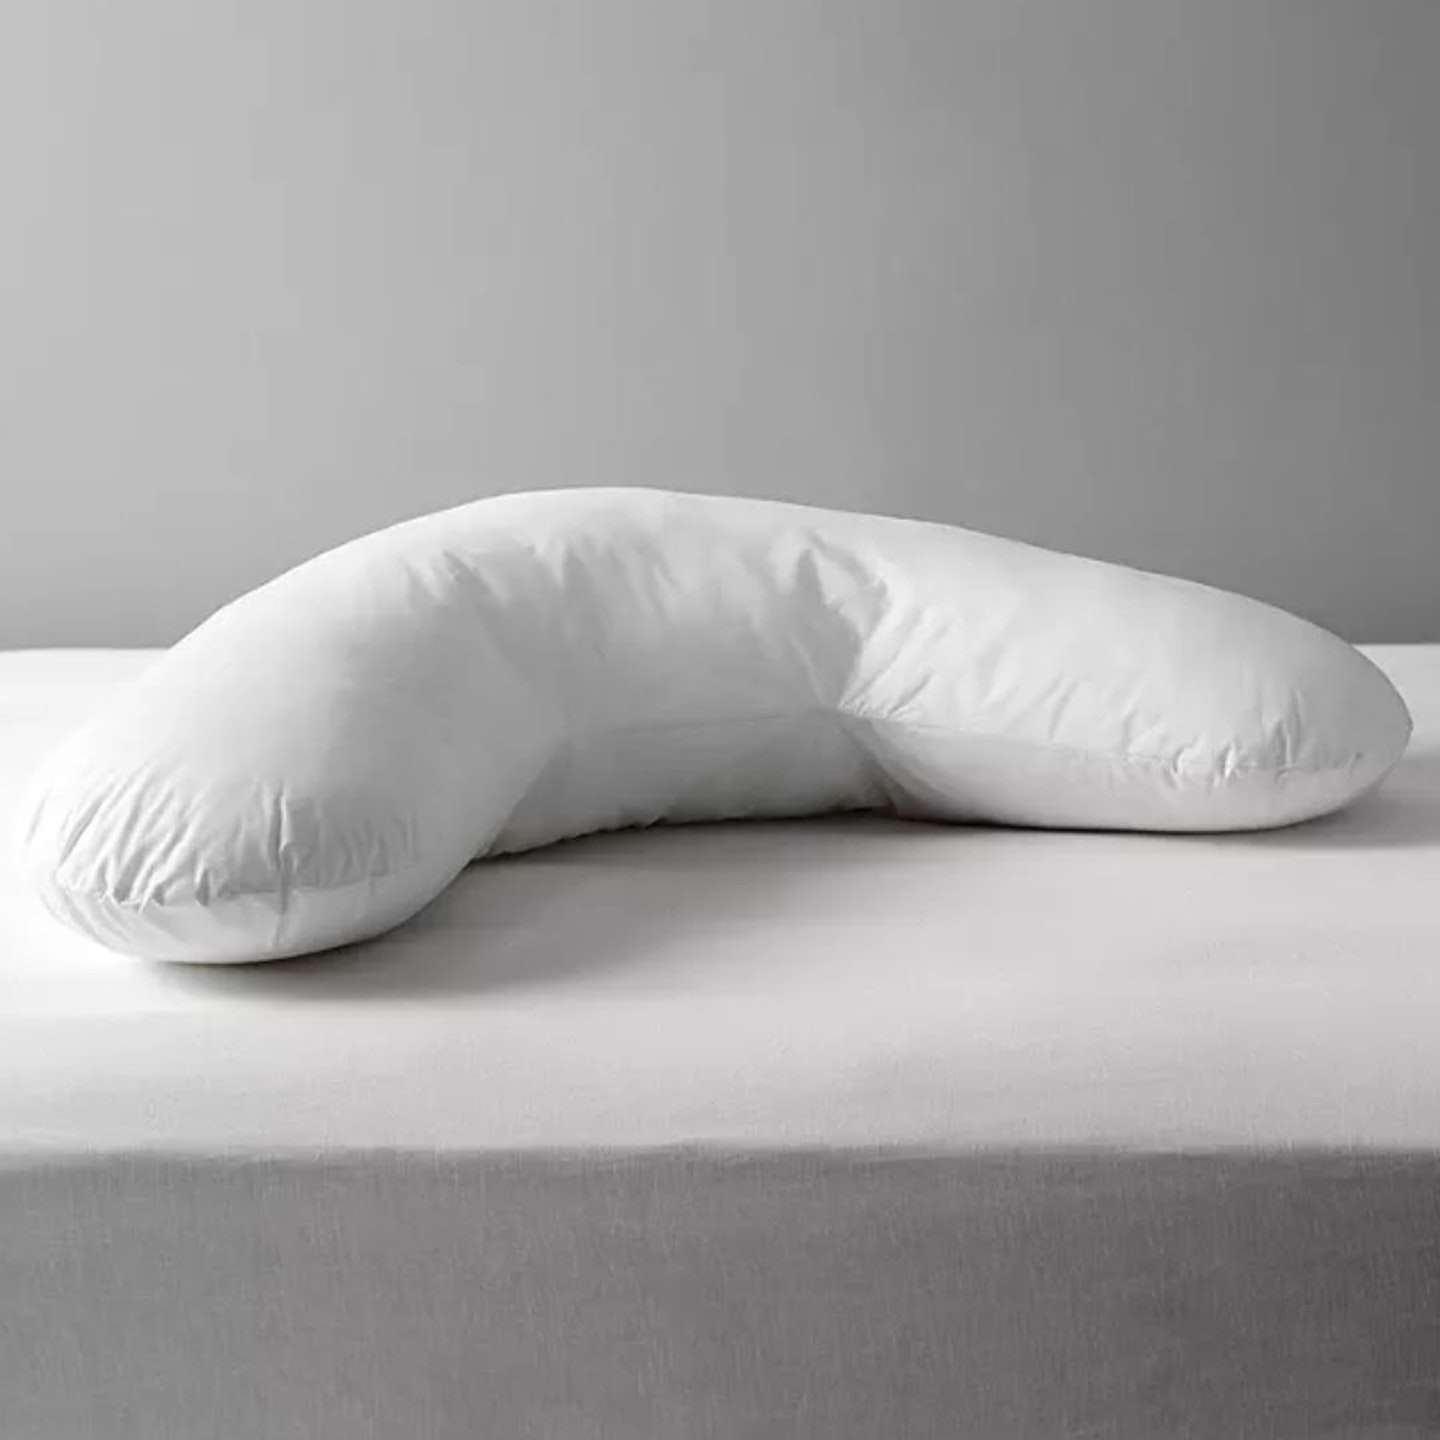 John Lewis Specialist Synthetic Carefree Comfort Teflon V-Shaped Support Pillow